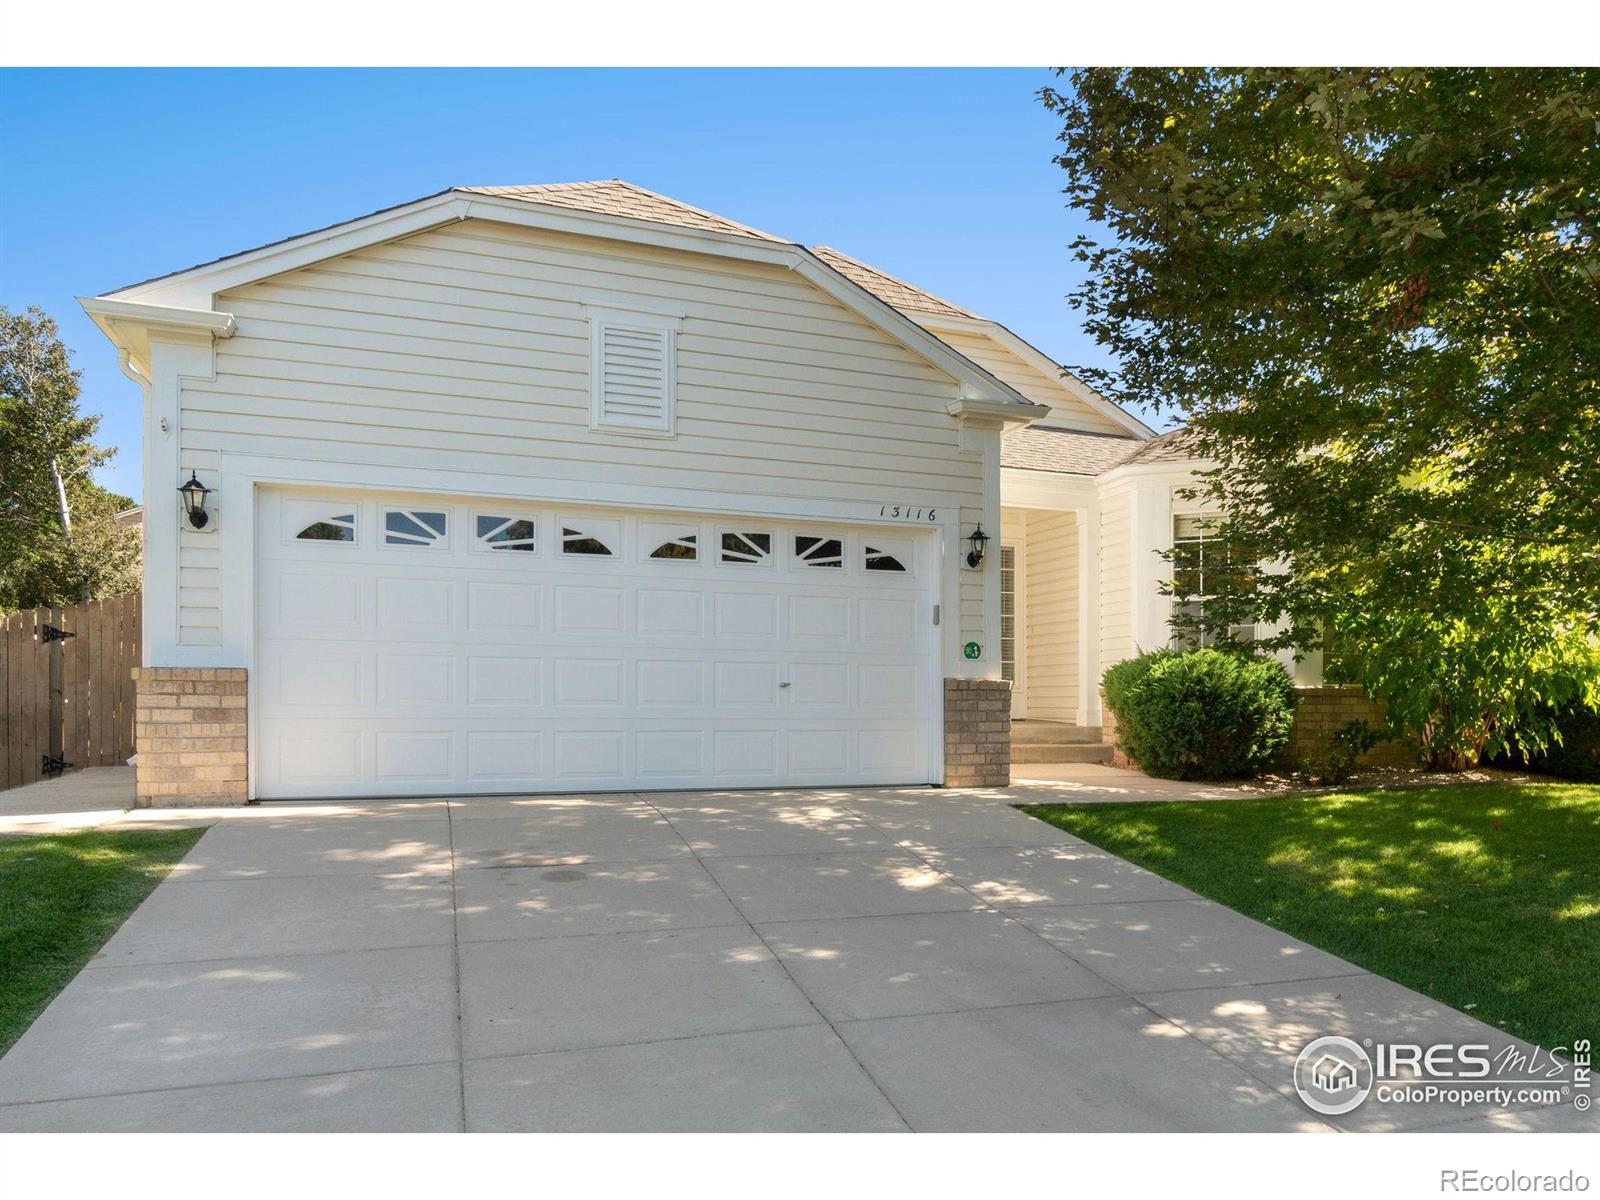 13116  clayton way, Thornton sold home. Closed on 2024-02-02 for $490,000.